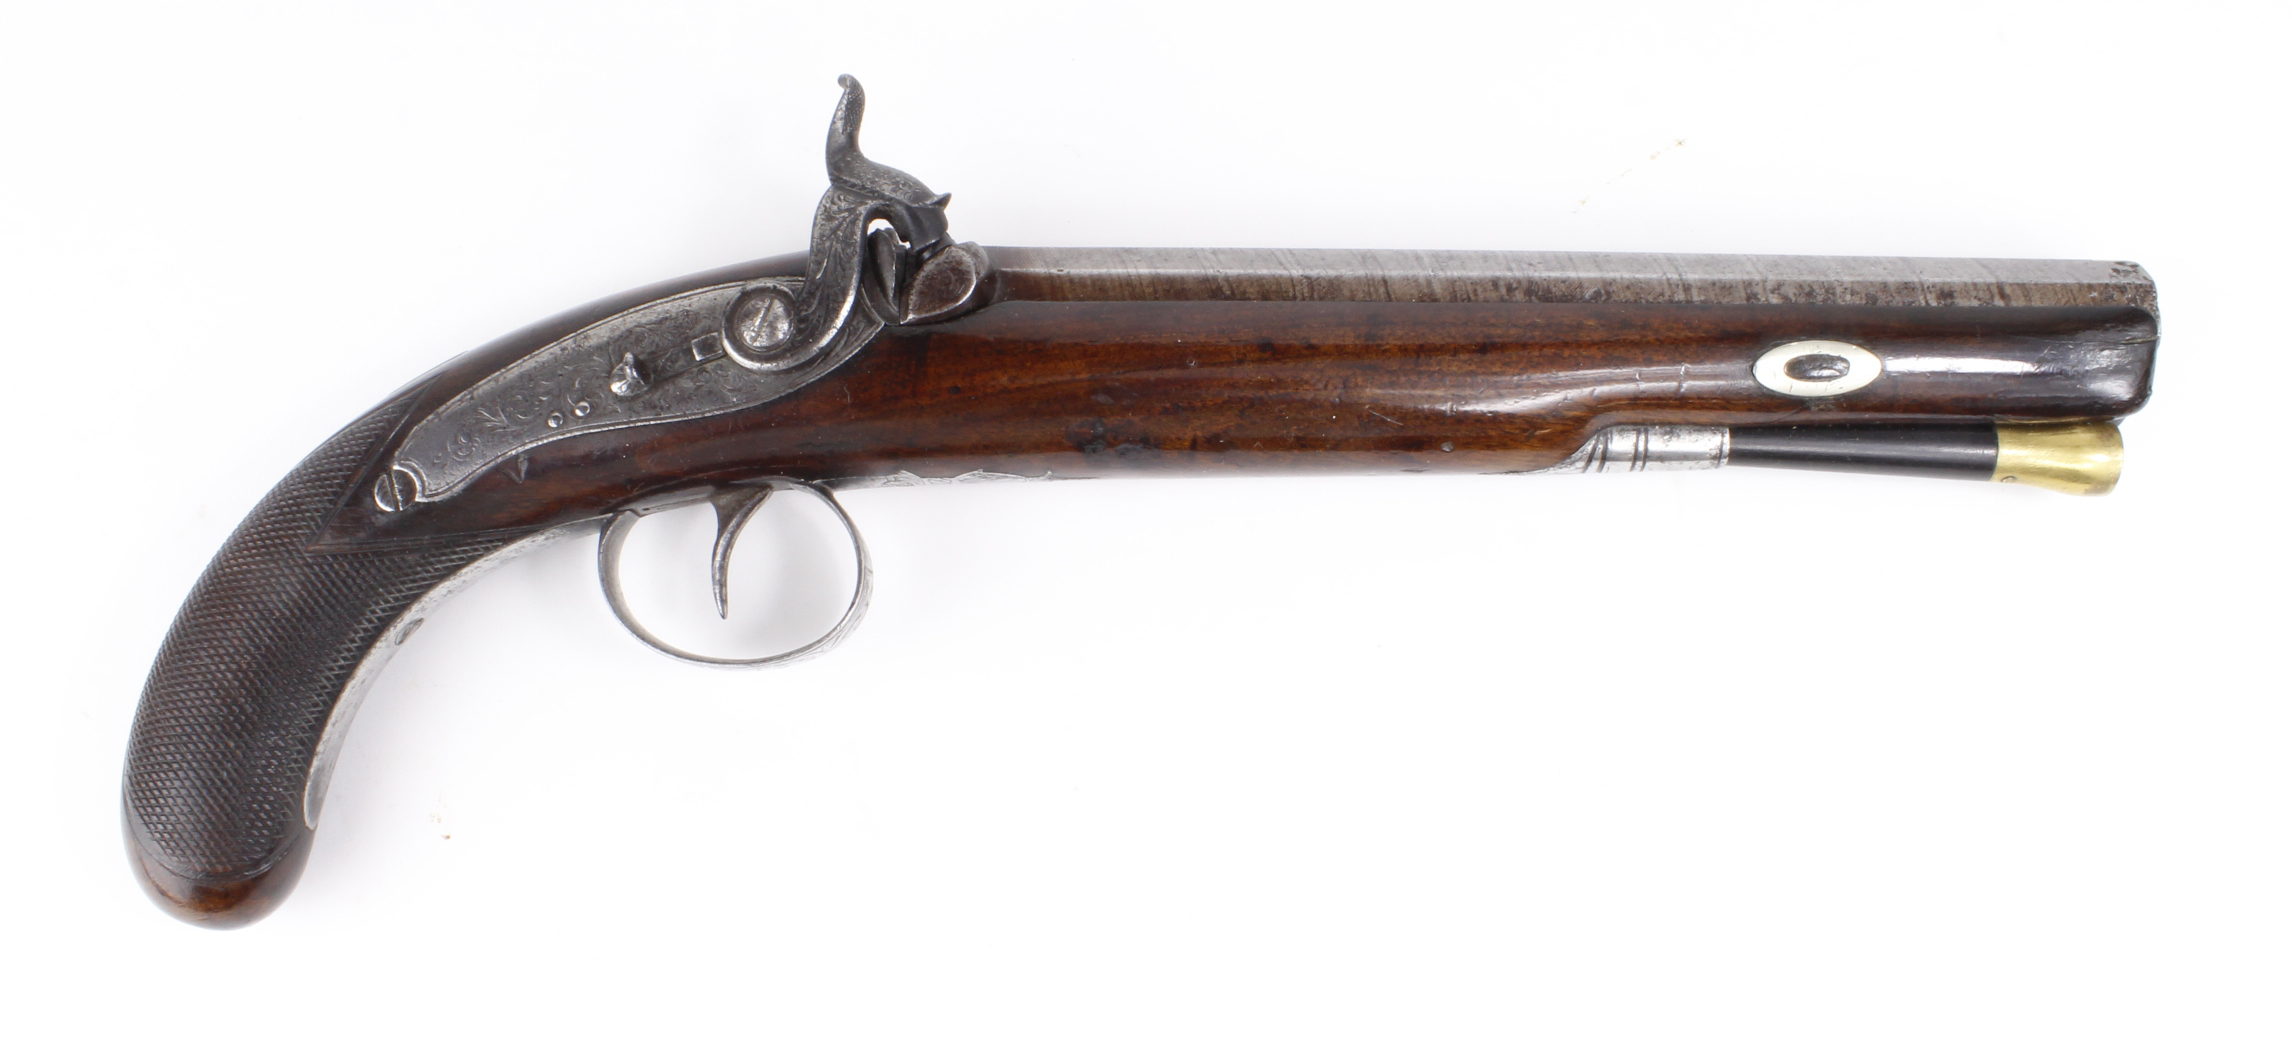 19th Century percussion duelling pistol with 9 inch barrel back action, engraved lock with safety